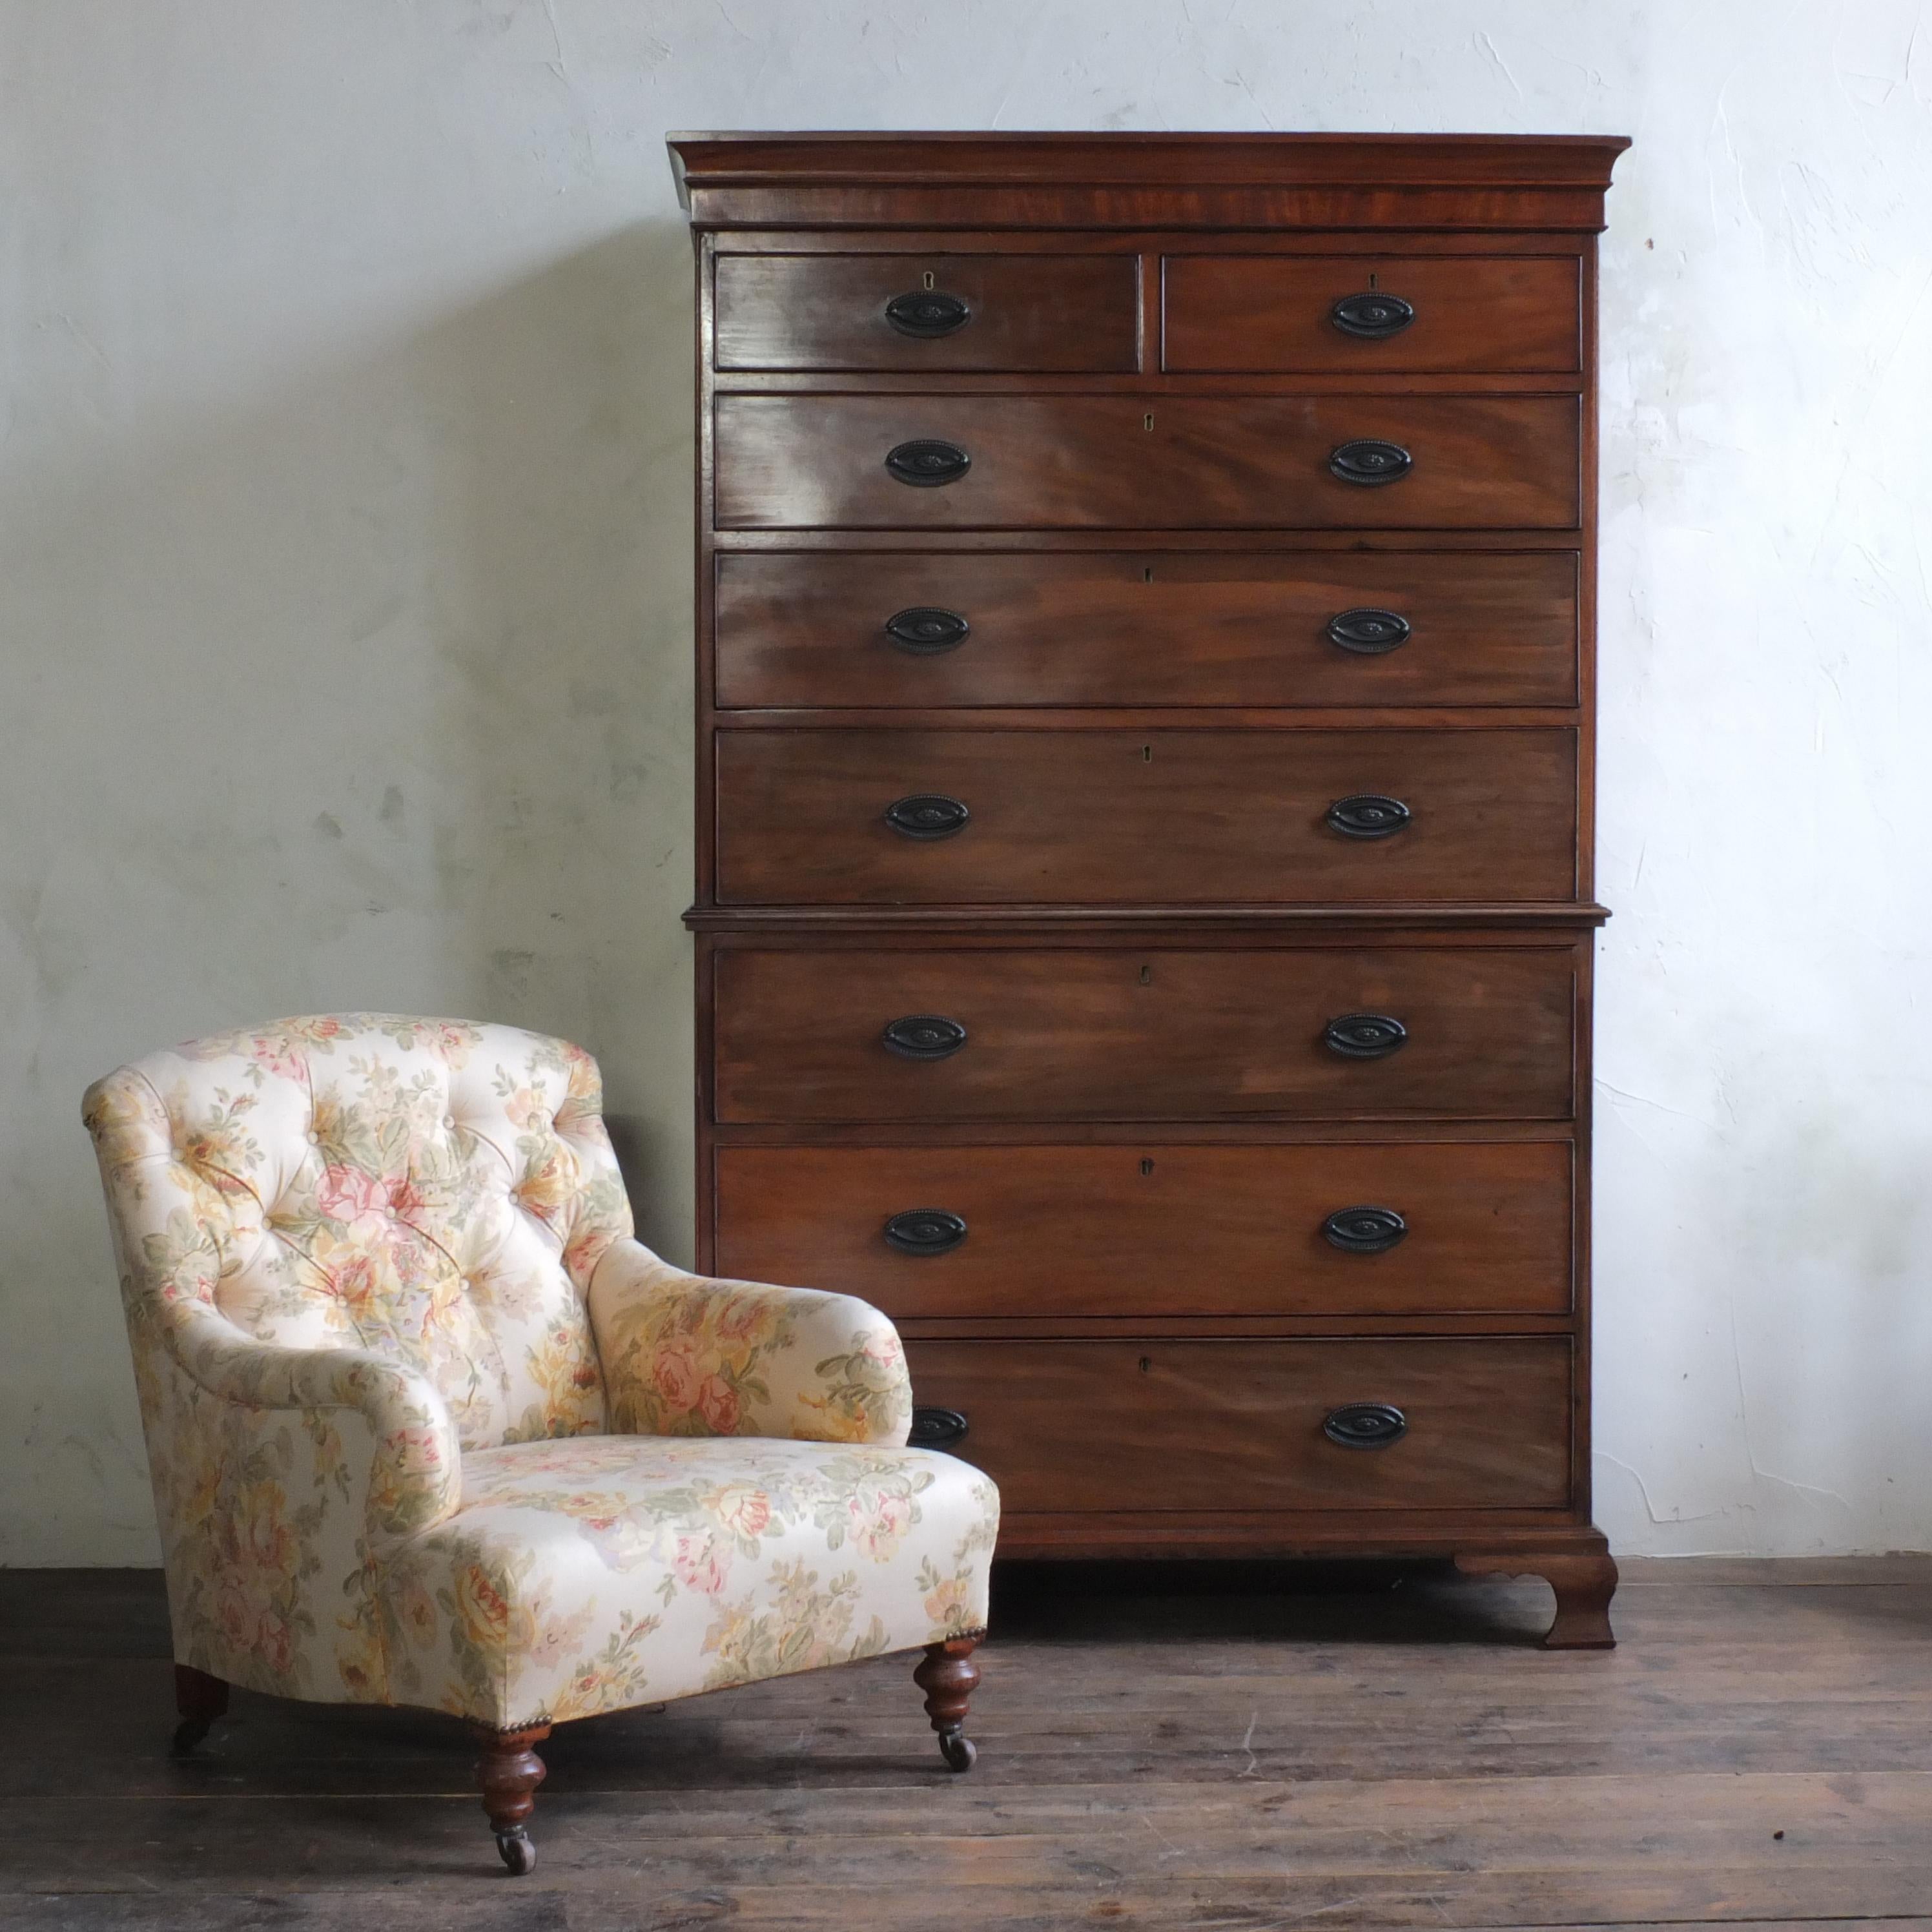 A large 19th century mahogany chest of drawers. In good clean condition throughout. Some expected wear but restored by the previous owner to a high standard.

Measures: 53cm deep
120cm wide
196cm high.